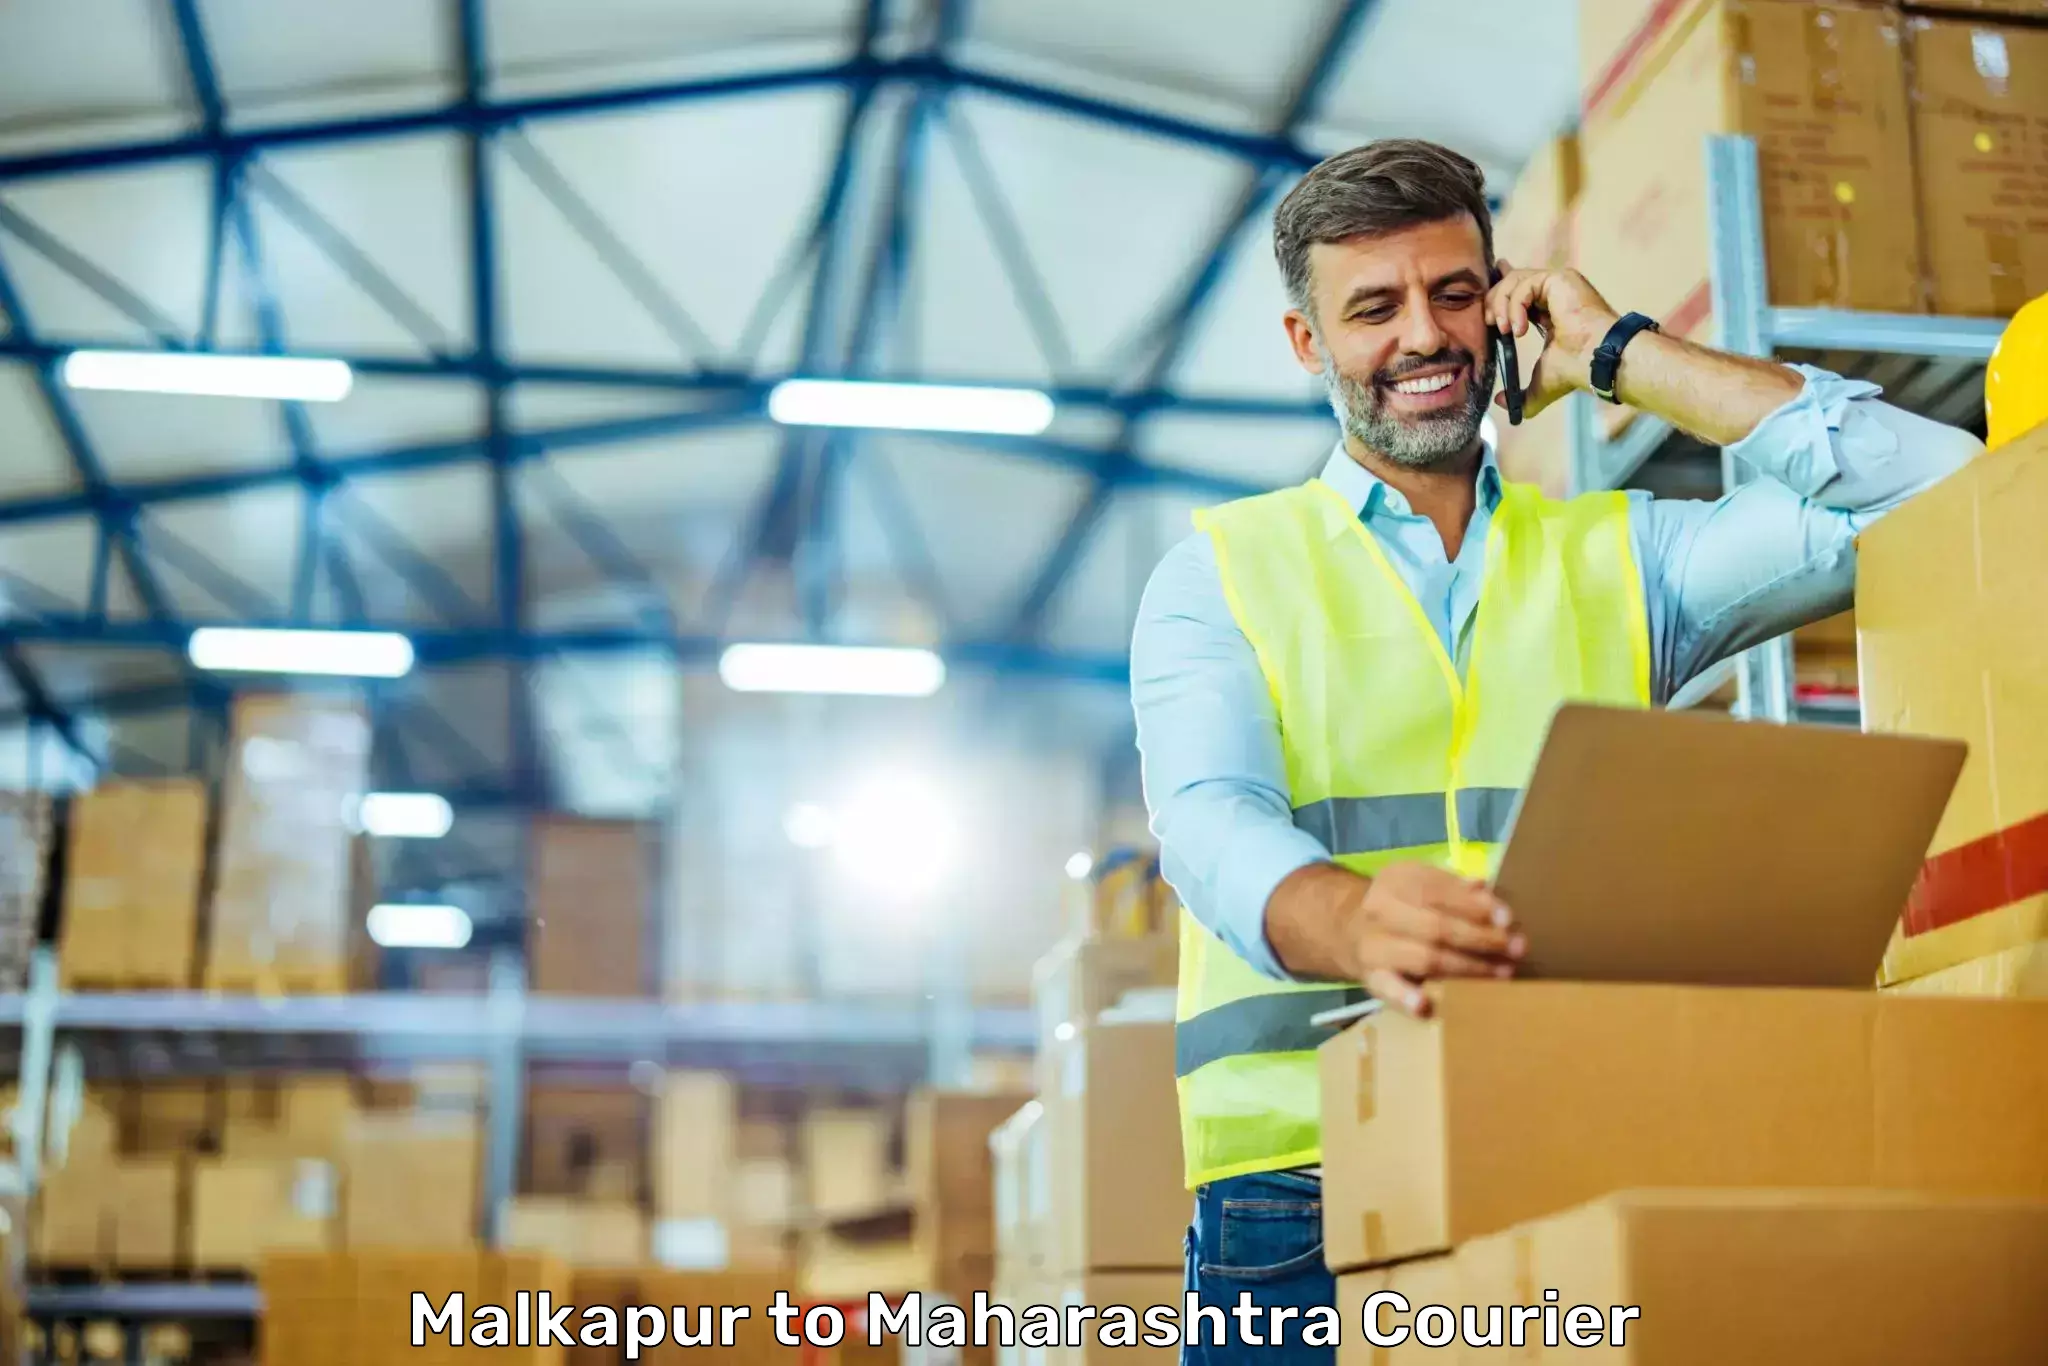 State-of-the-art courier technology Malkapur to Kalbadevi